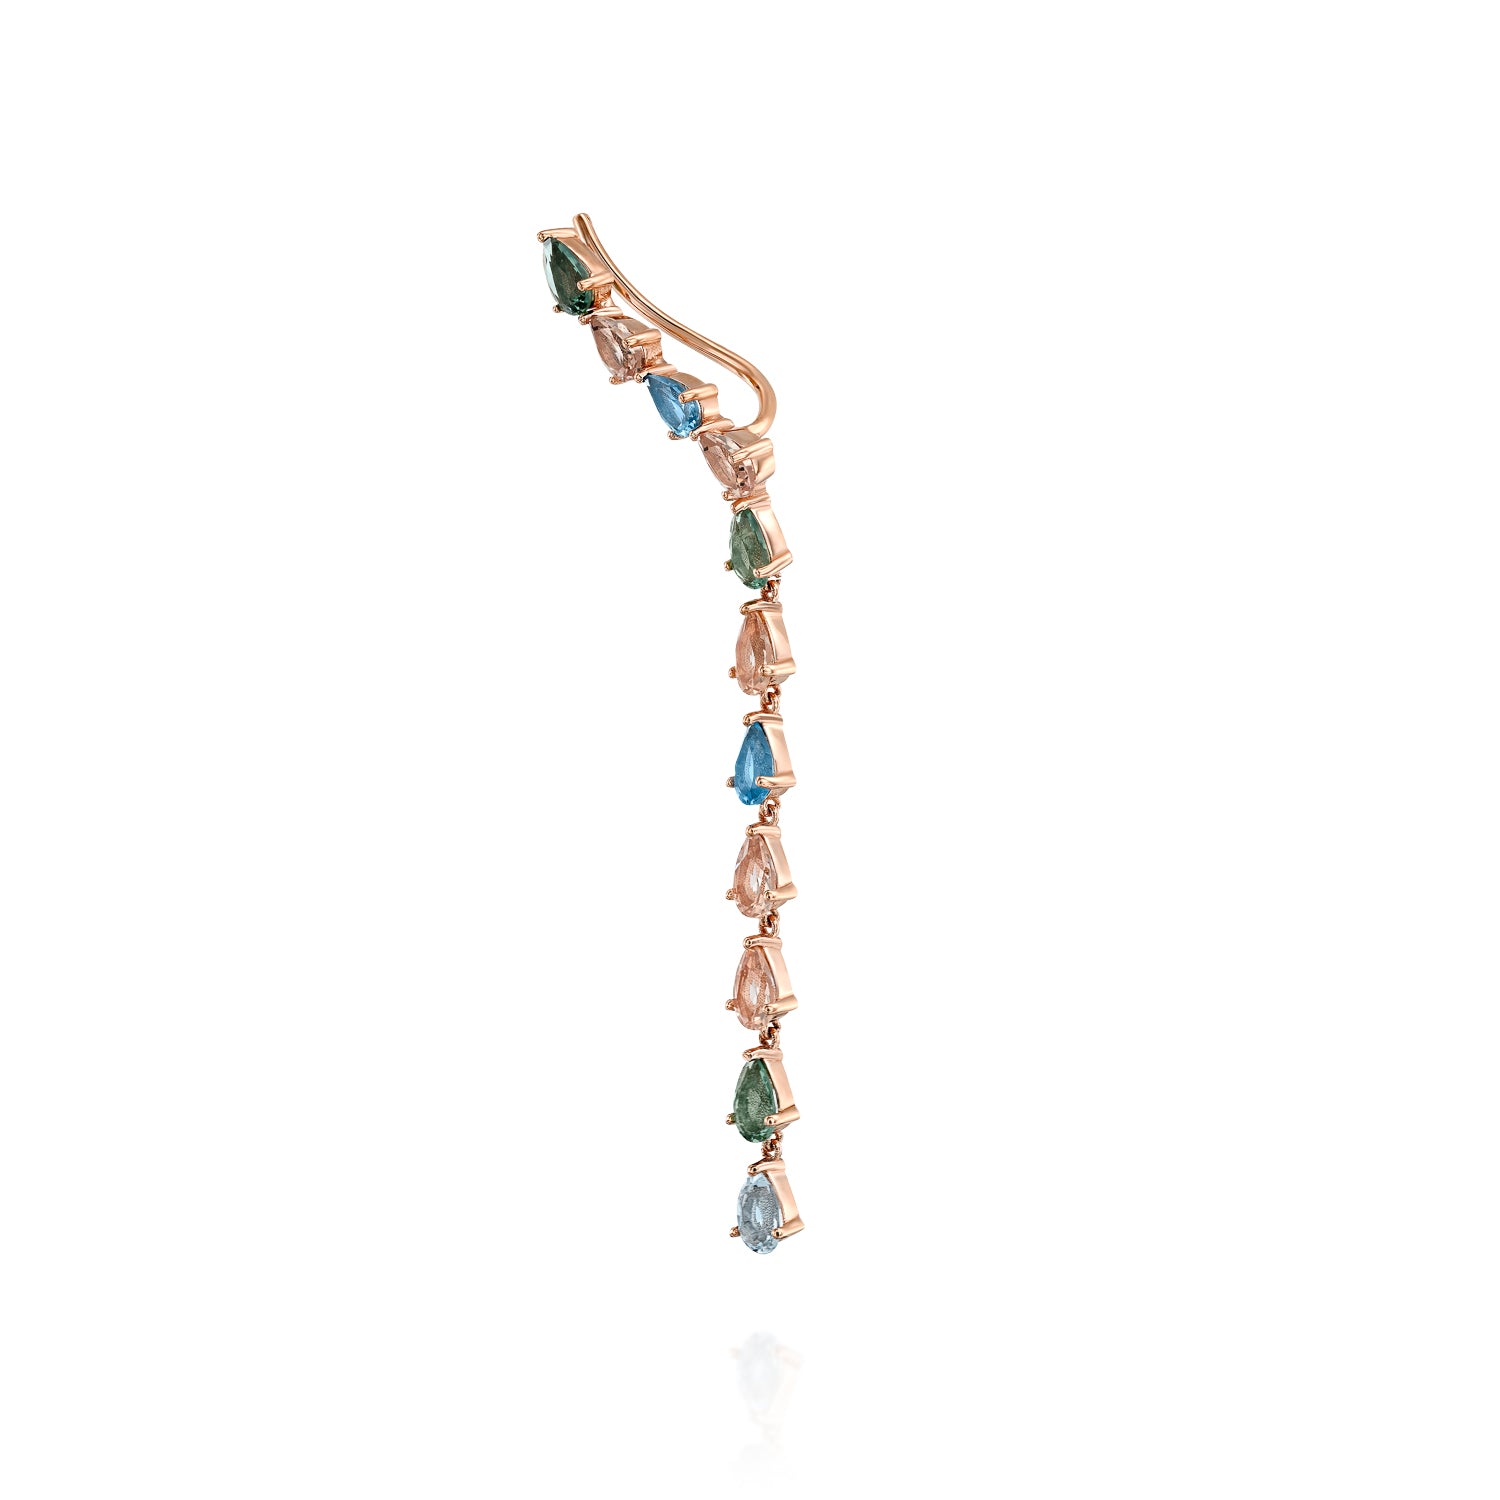 Morganite Blue Topaz and Turquoise Earrings